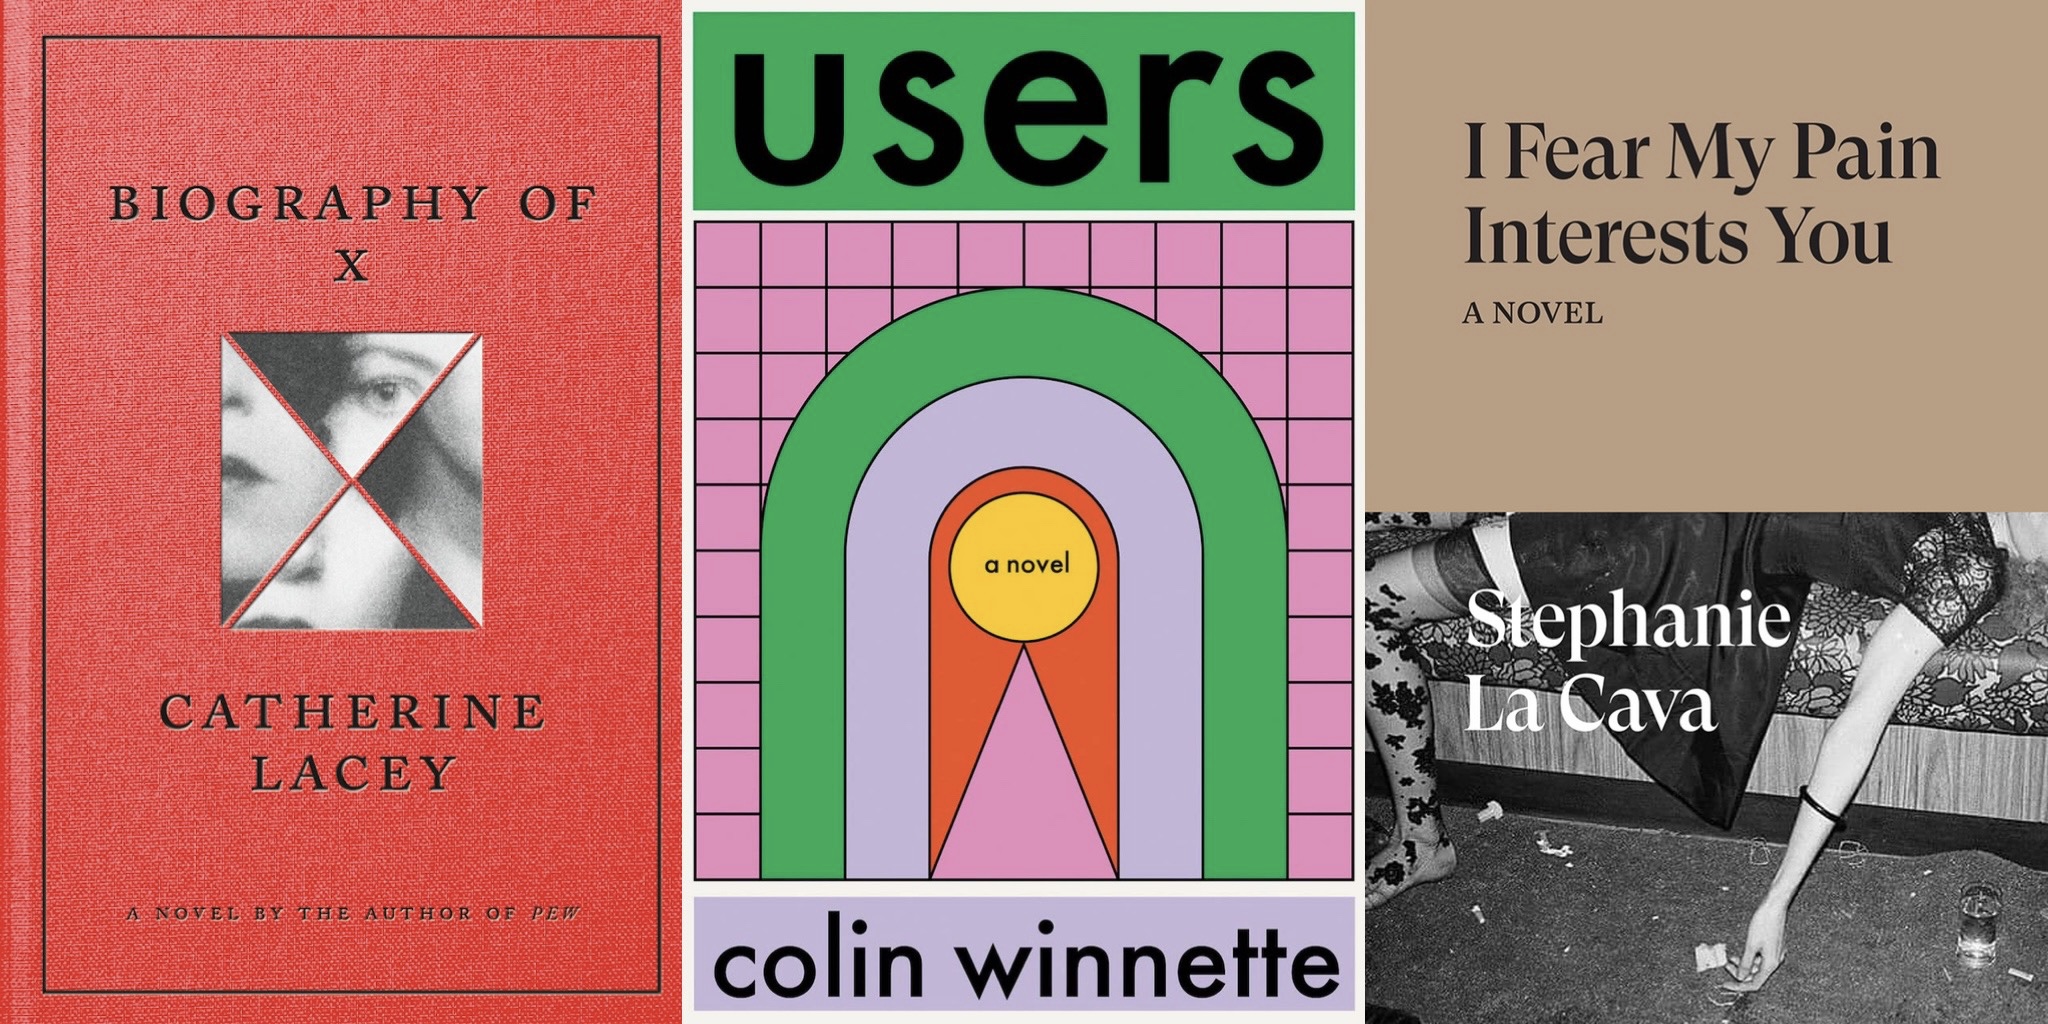 3 books to read this month: Biography of X, Users & I Fear My Pain Interests You